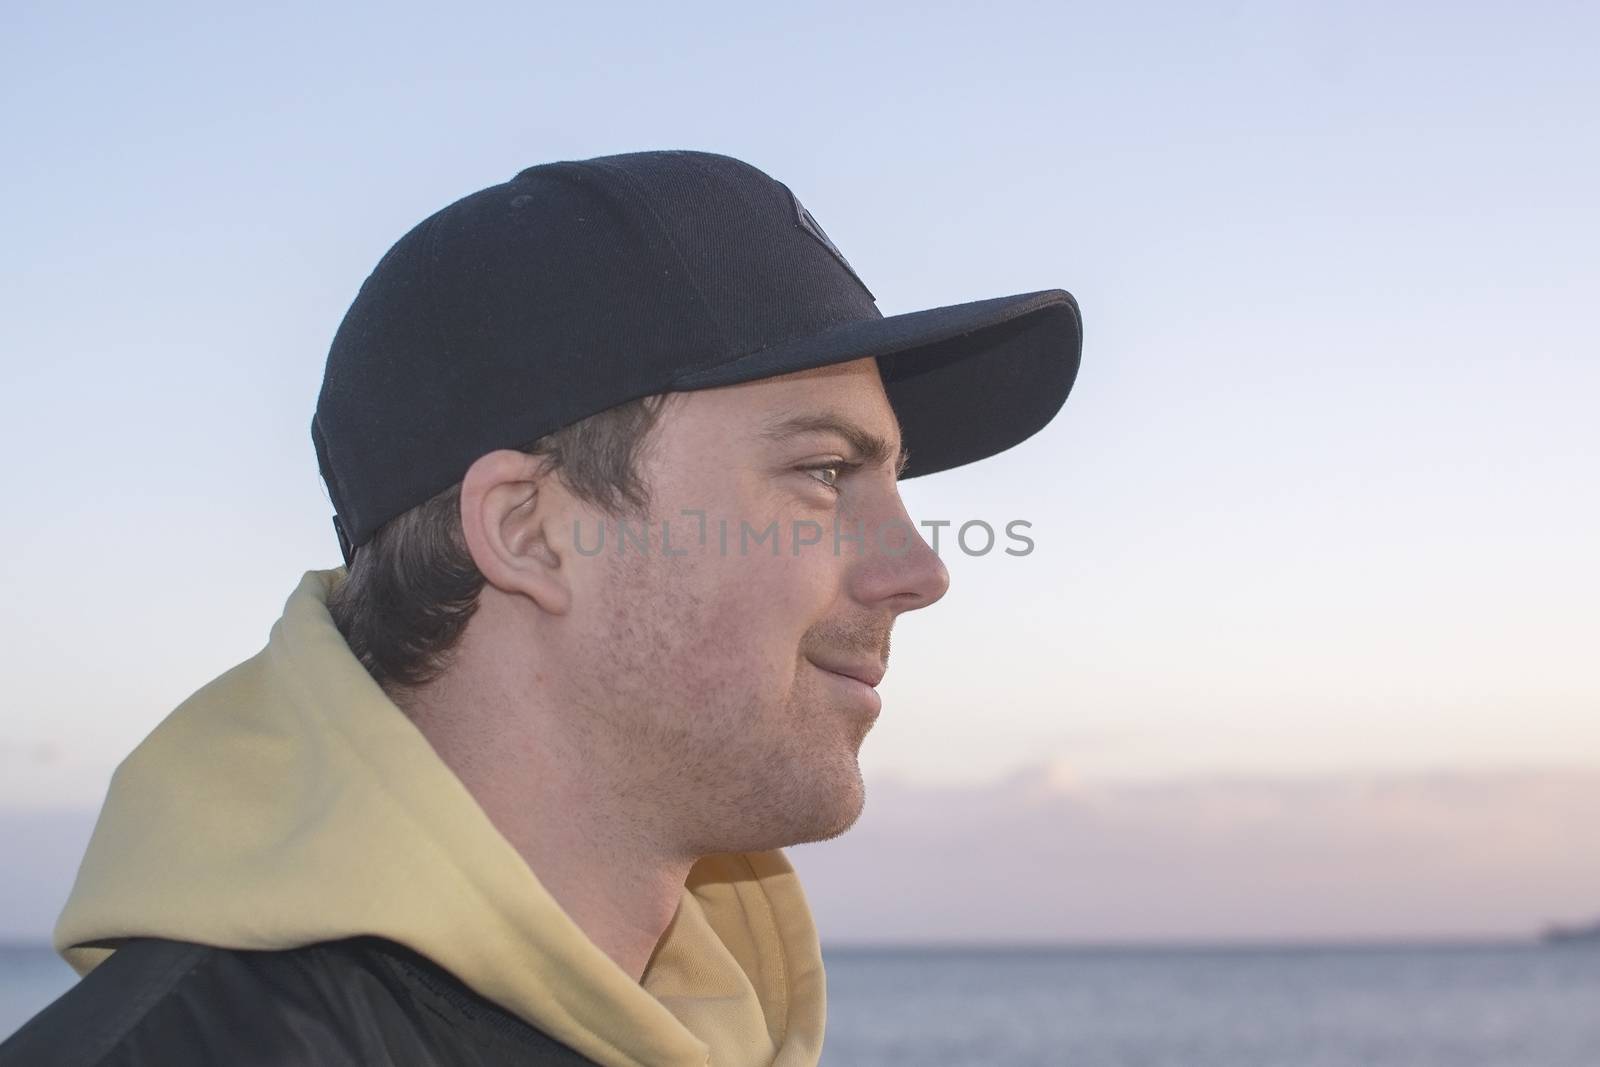 Profile shot of handsome smiling natural and casual looking male in late twenties with hood jacket and cap looks straight forward, ocean horizon behind